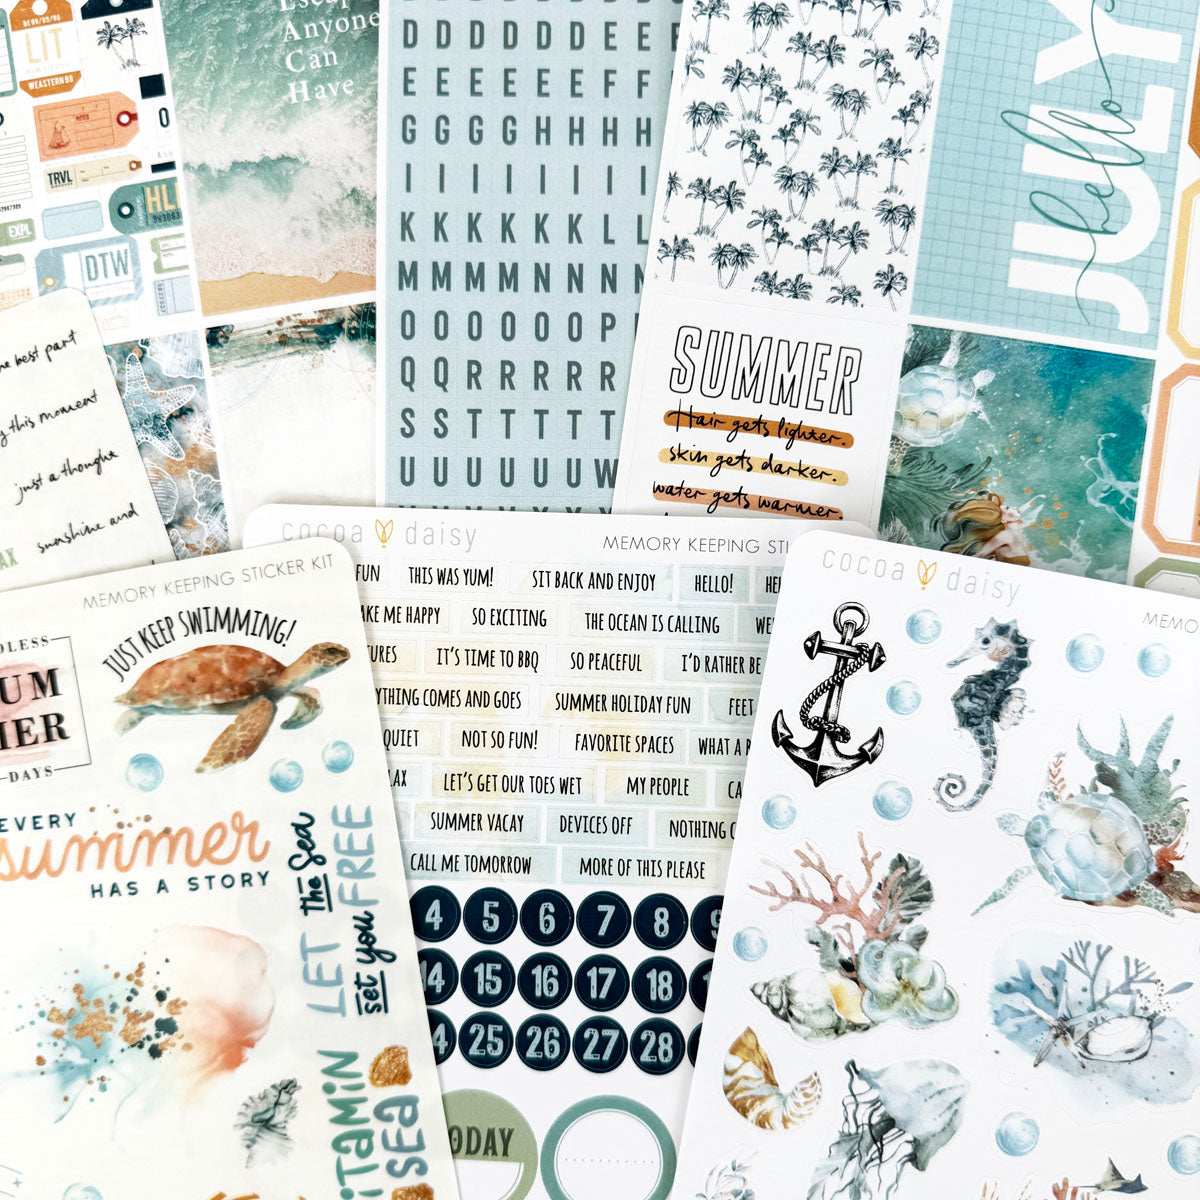 Memory Keeping Sticker Kit Subscription - 1 month